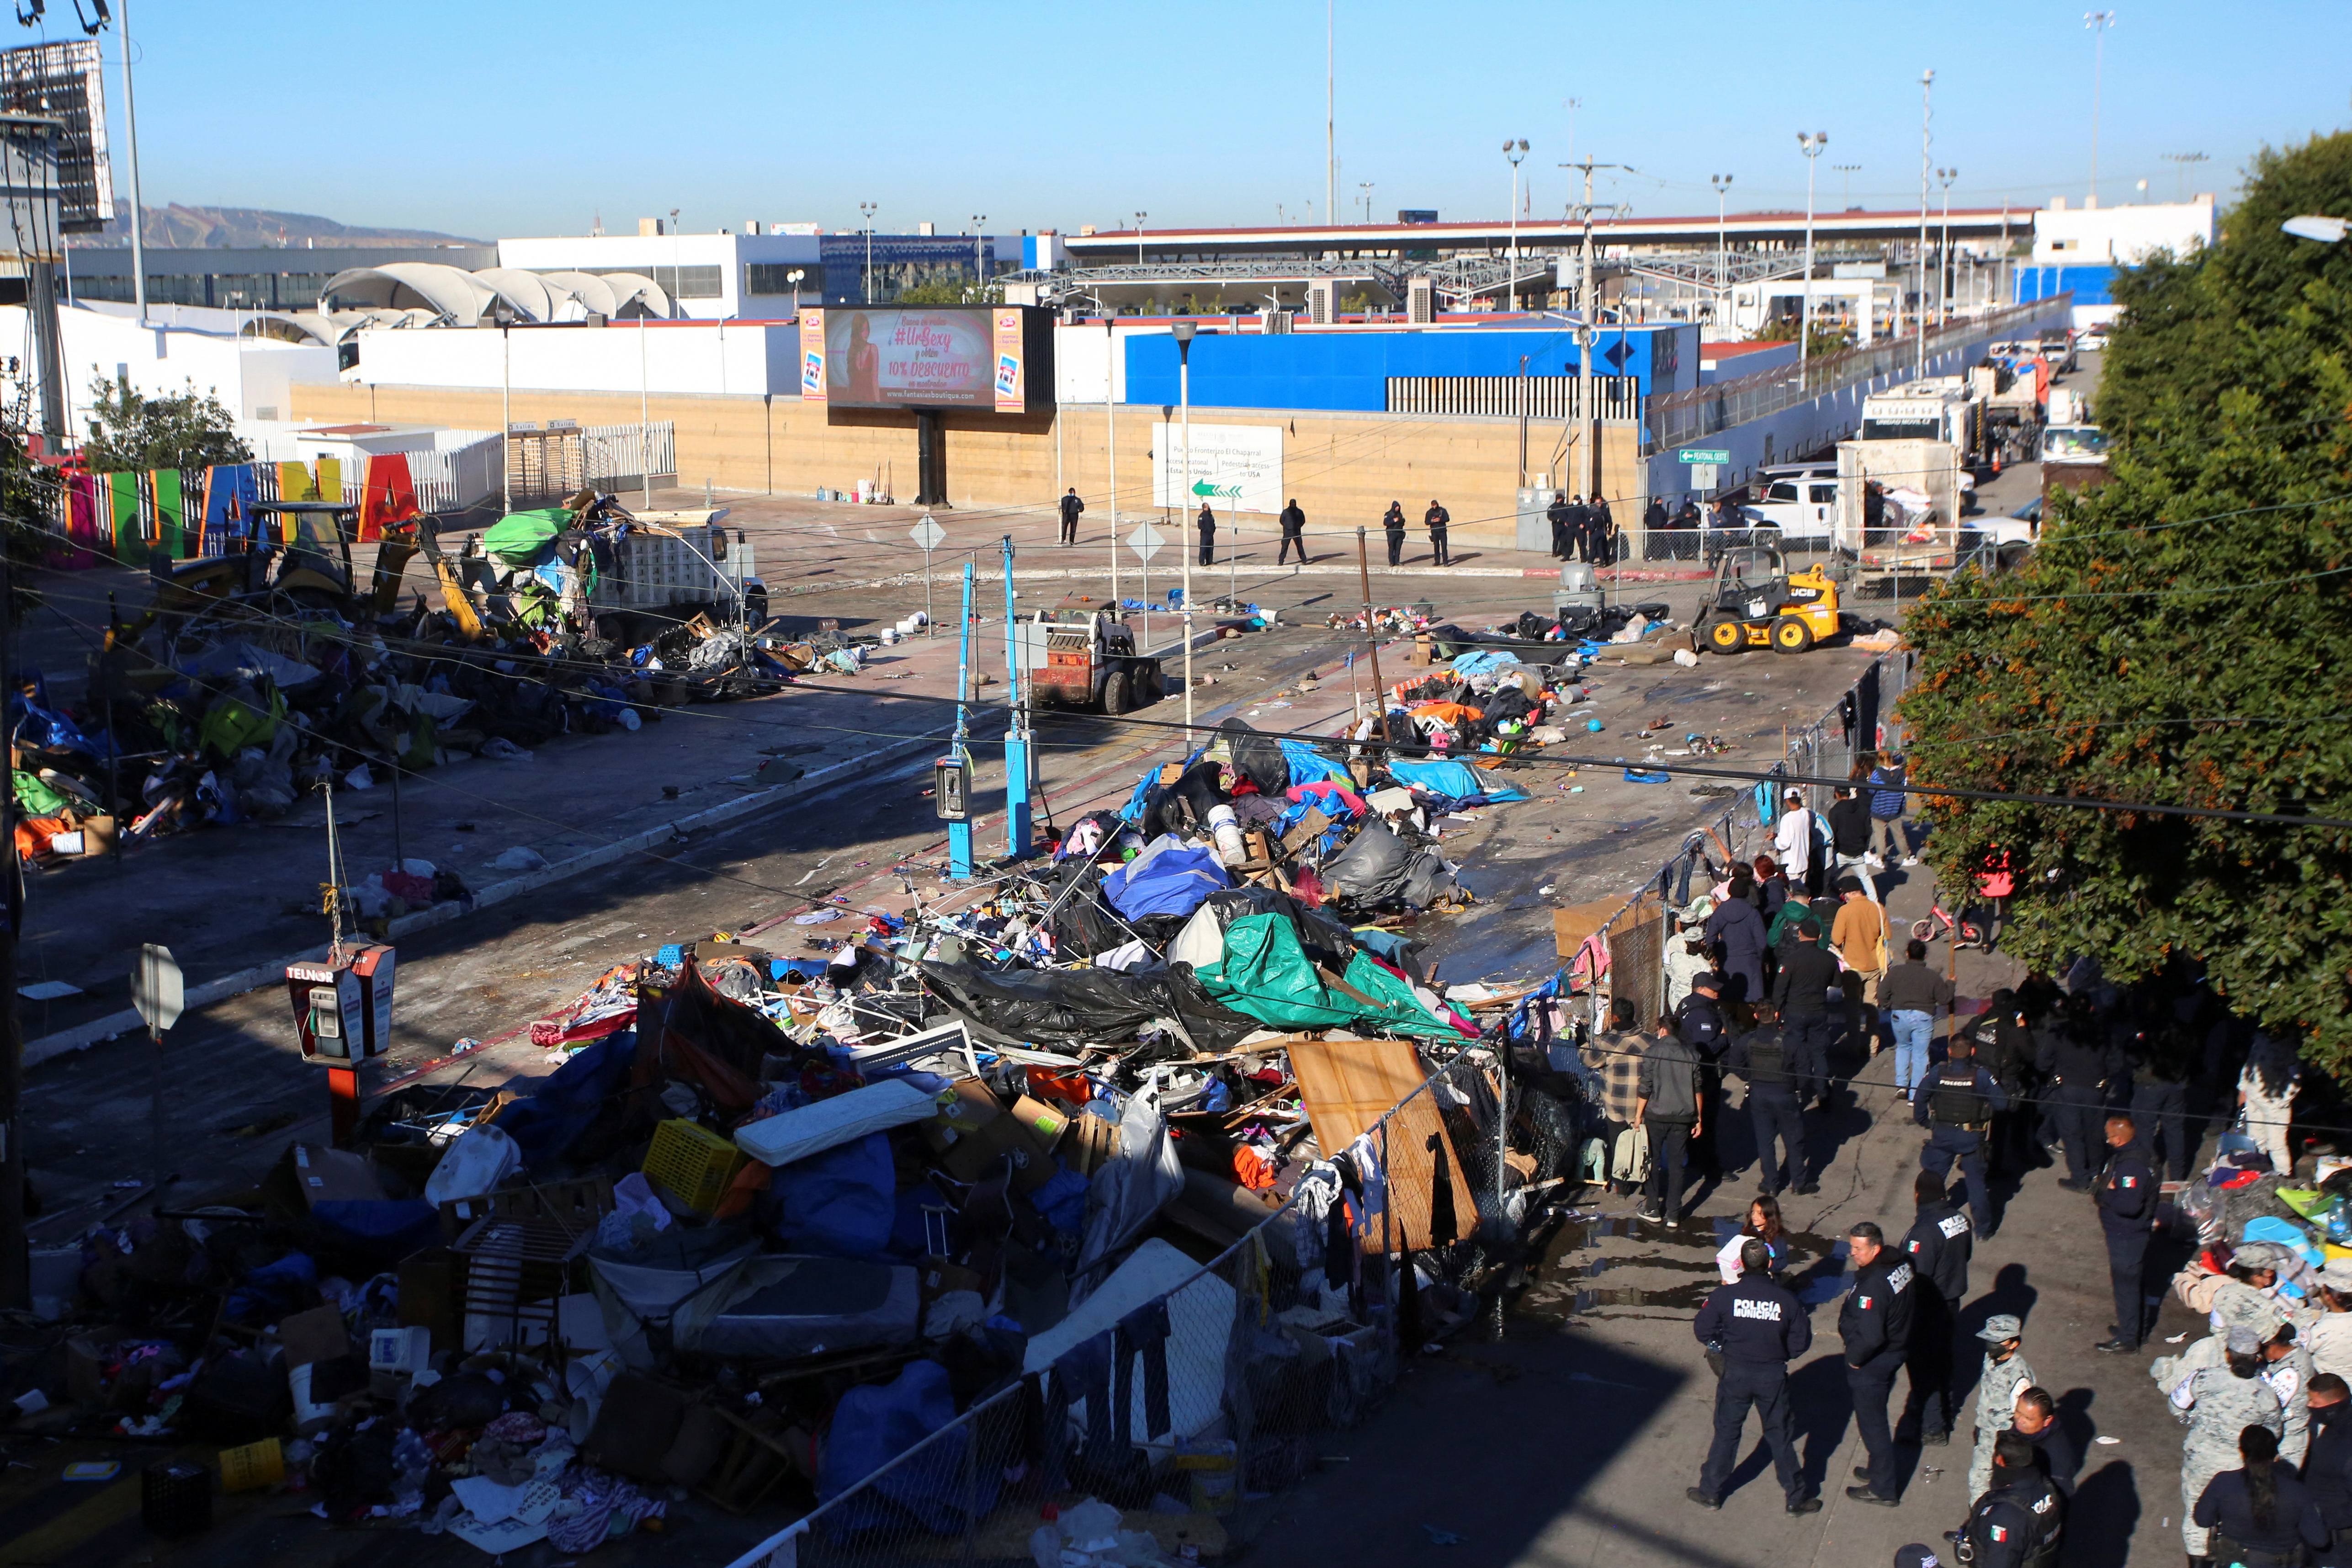 Belongings of migrants are scattered, after Mexican authorities cleared a makeshift camp, where hundreds of people heading towards the U.S. border were staying, at the El Chaparral border crossing in Tijuana, Mexico, February 6, 2022. REUTERS/Jorge Duenes